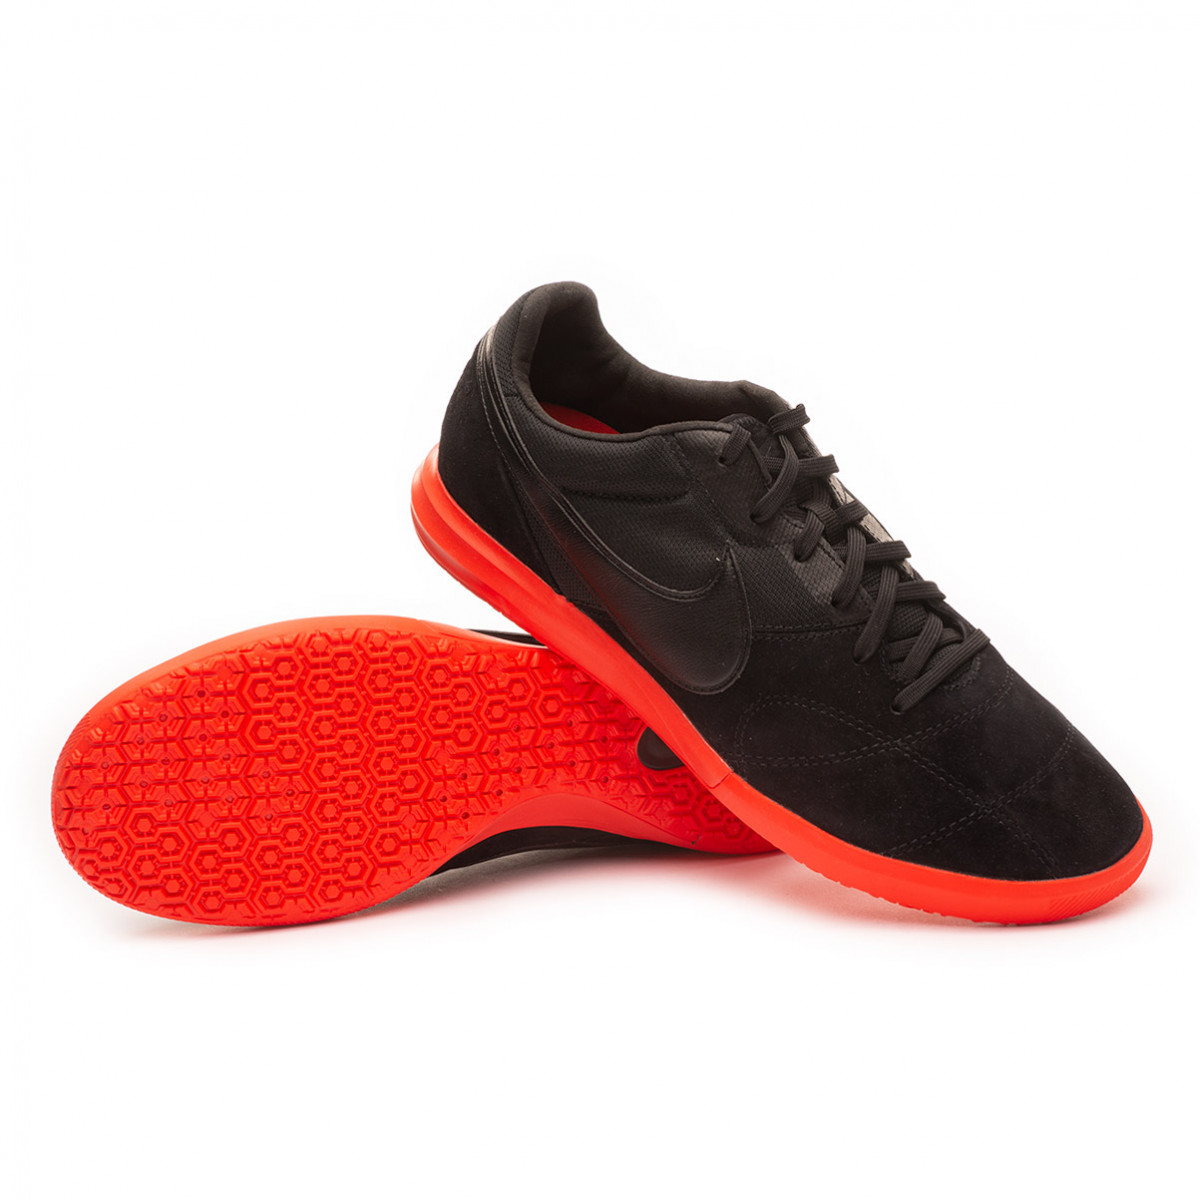 nike premier 2 black and red